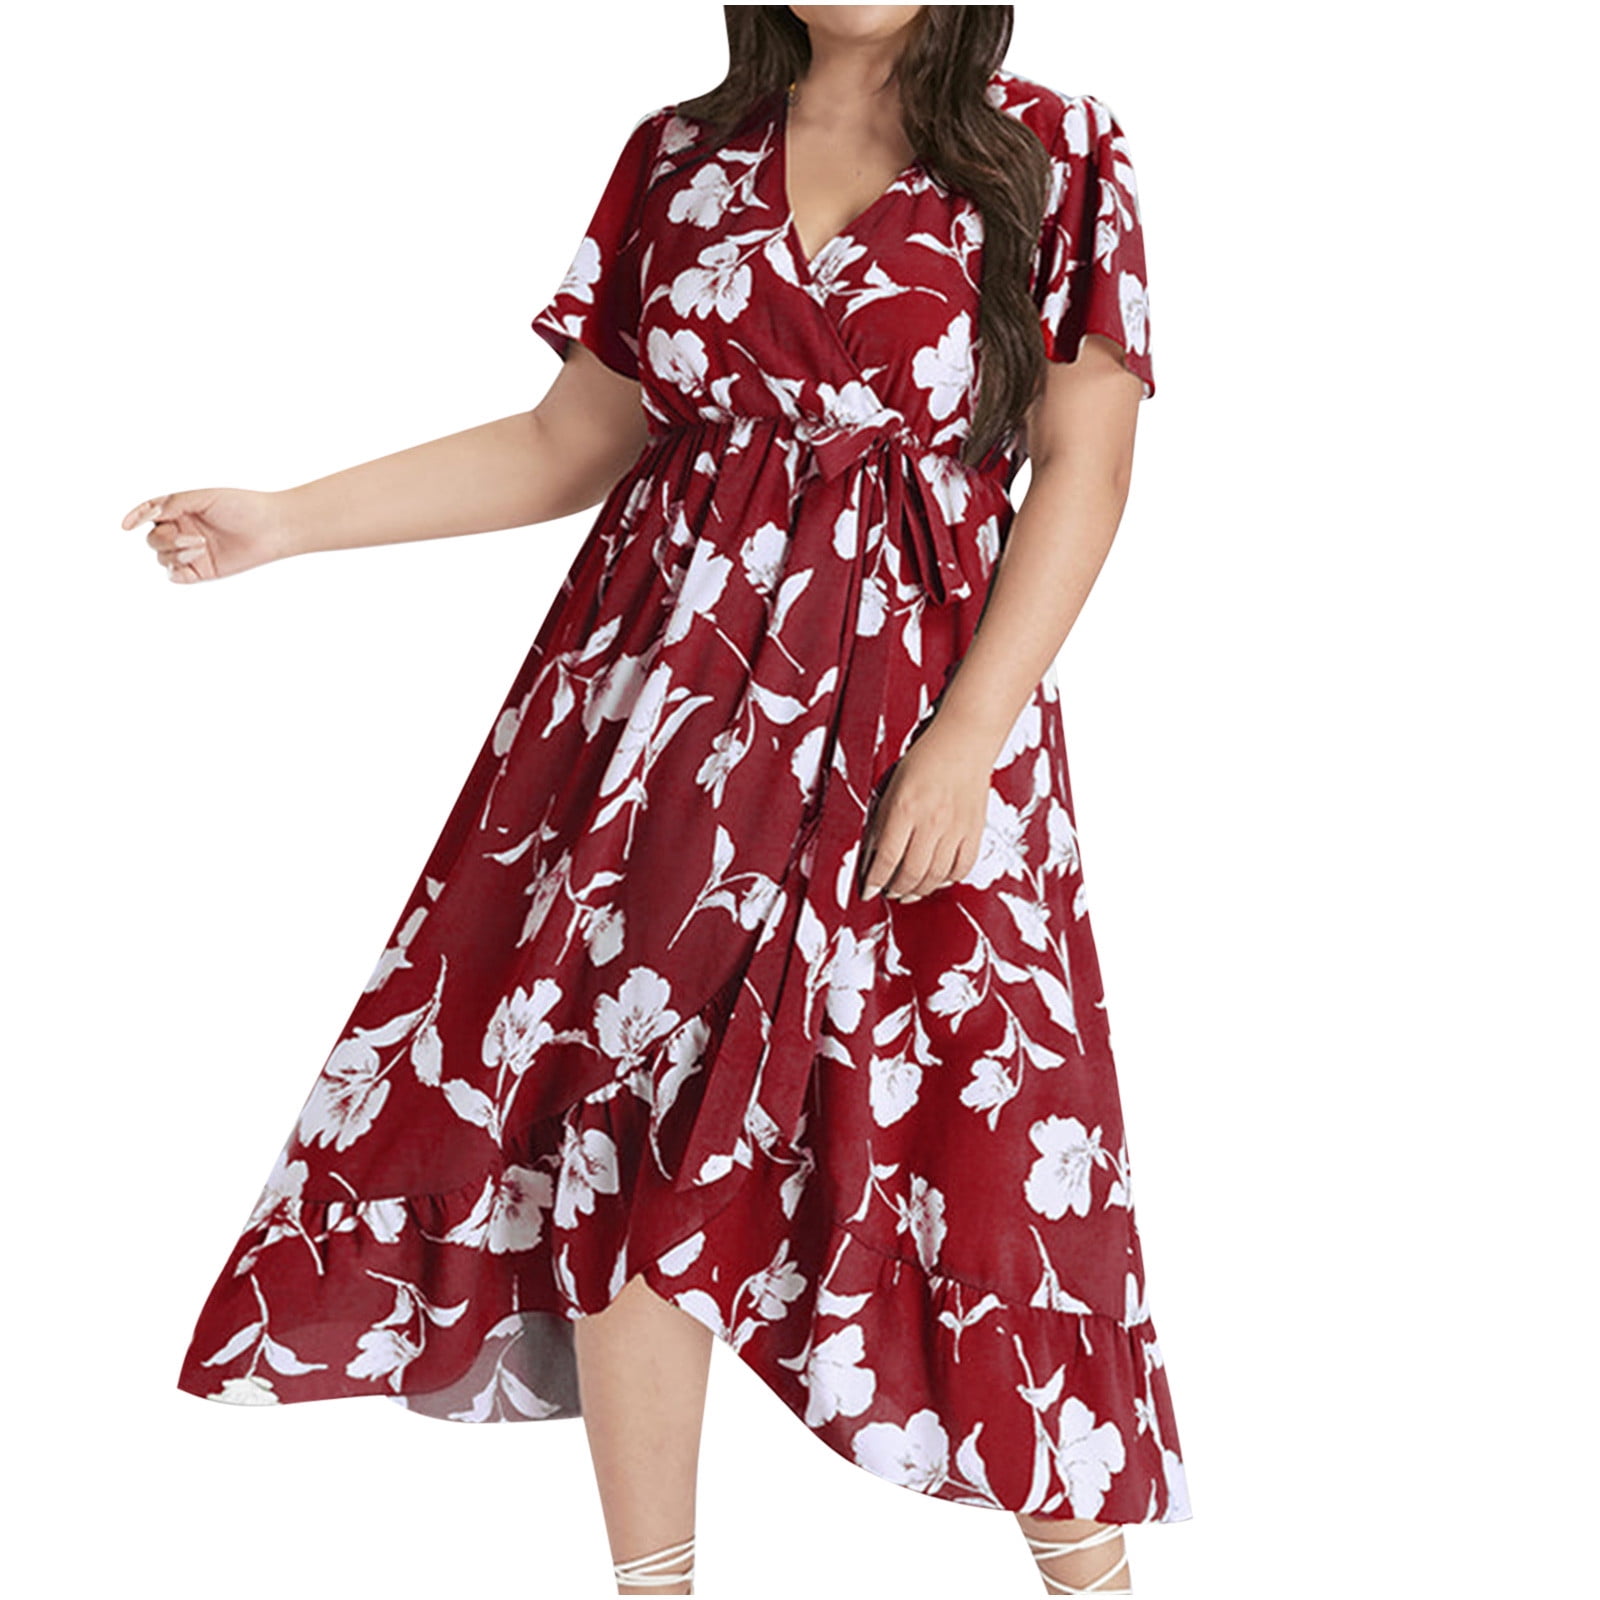 Womens Casual Floral Print Short Sleeve Round Neck Soft Vintage Plus Size Maxi Dress Mother Daughter Summer Casual Floral Print Long Dress with High Waist Ruffle Sleeves 